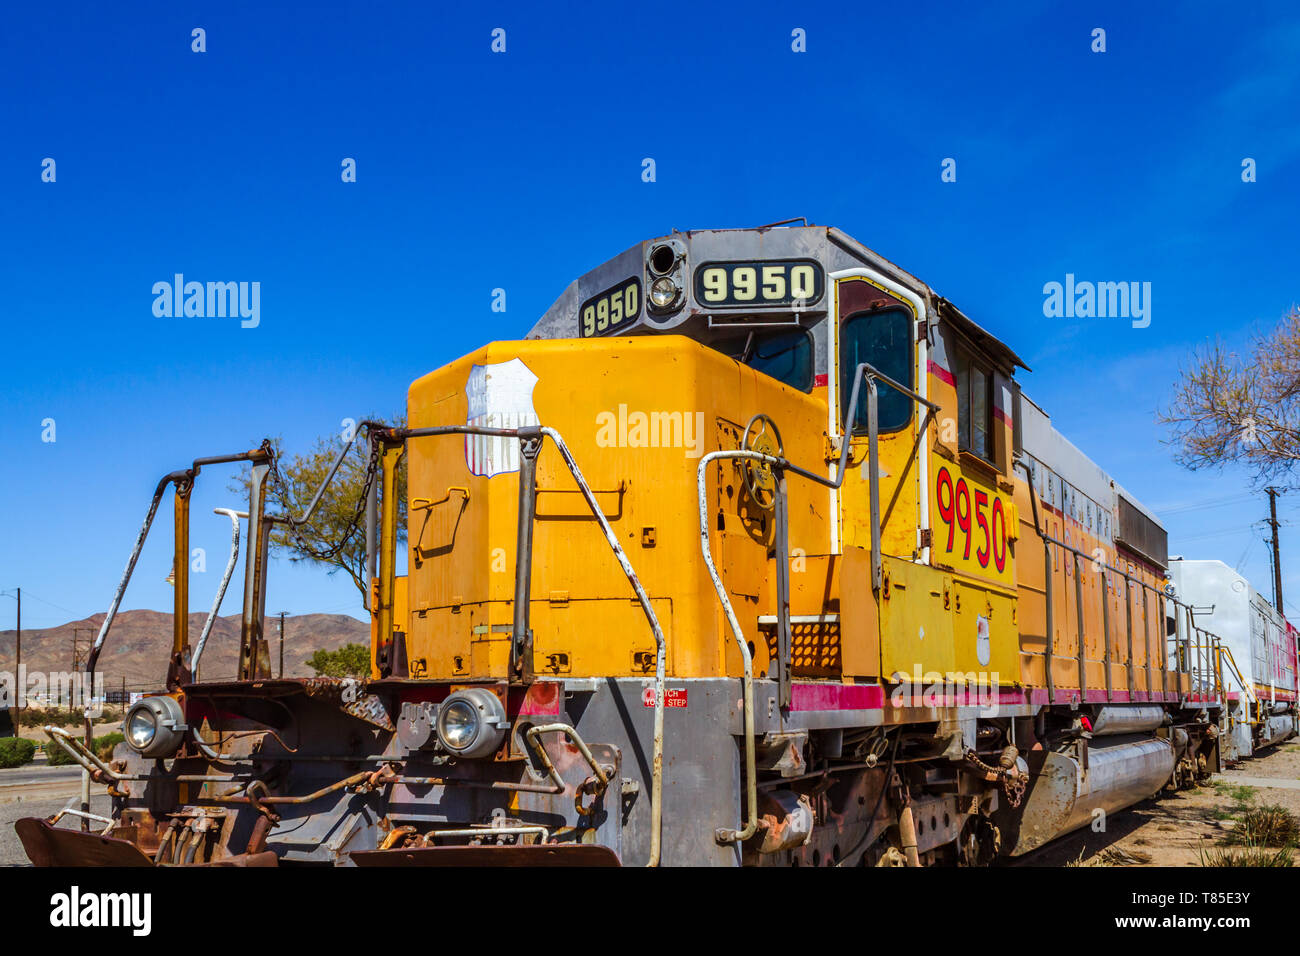 Barstow, CA / USA – April 14, 2019: Union Pacific railroad engine number 9950 at the Western America Railroad Museum located at the Barstow Harvey Hou Stock Photo